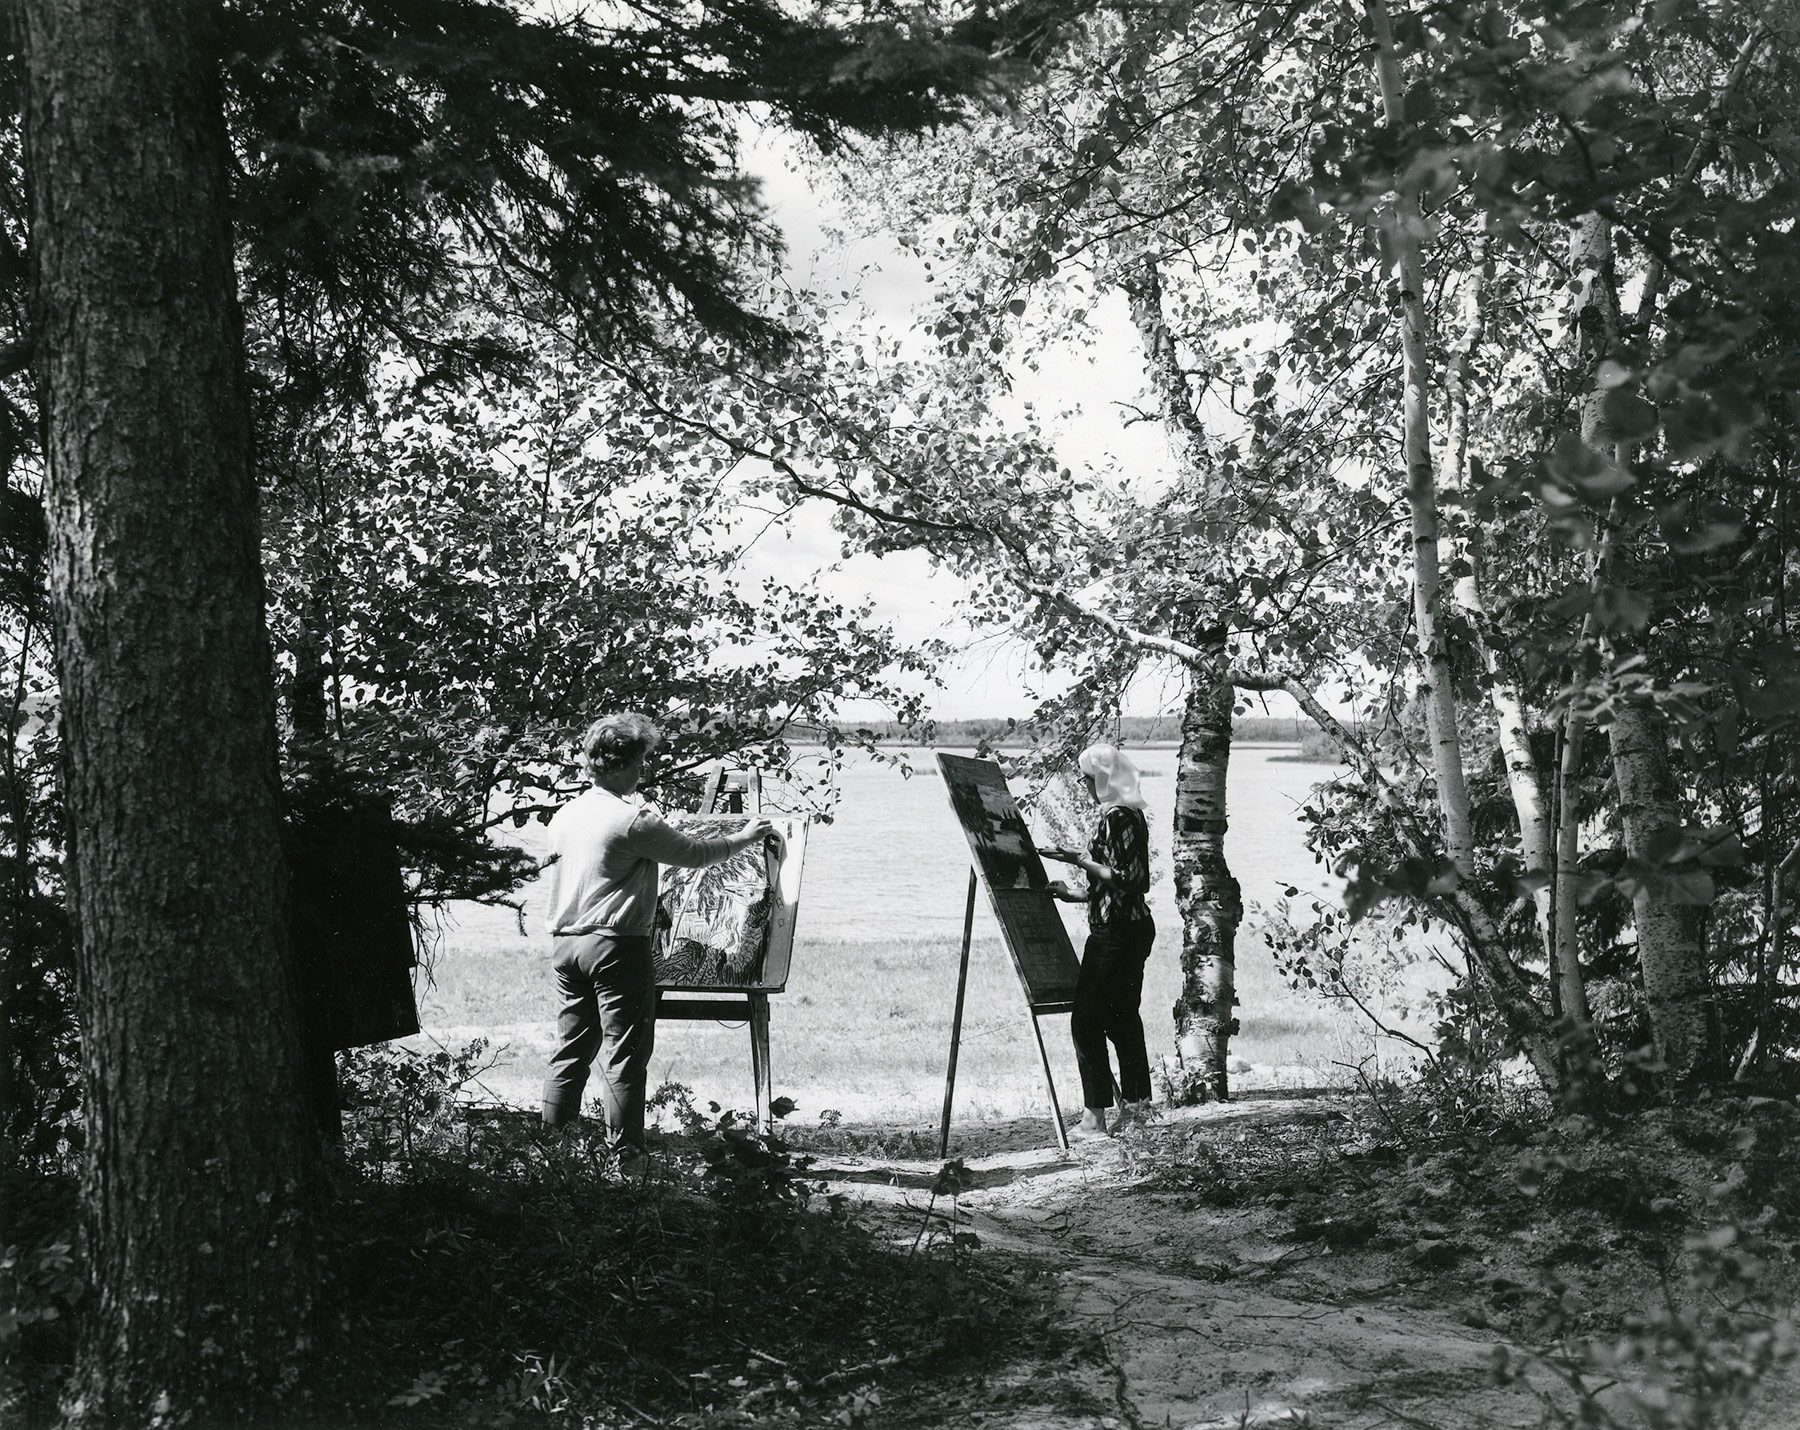 Black and white photograph of two women, surrounded by trees, standing in front of easels and sketching on canvases. A shoreline and lake are visible in the distance.